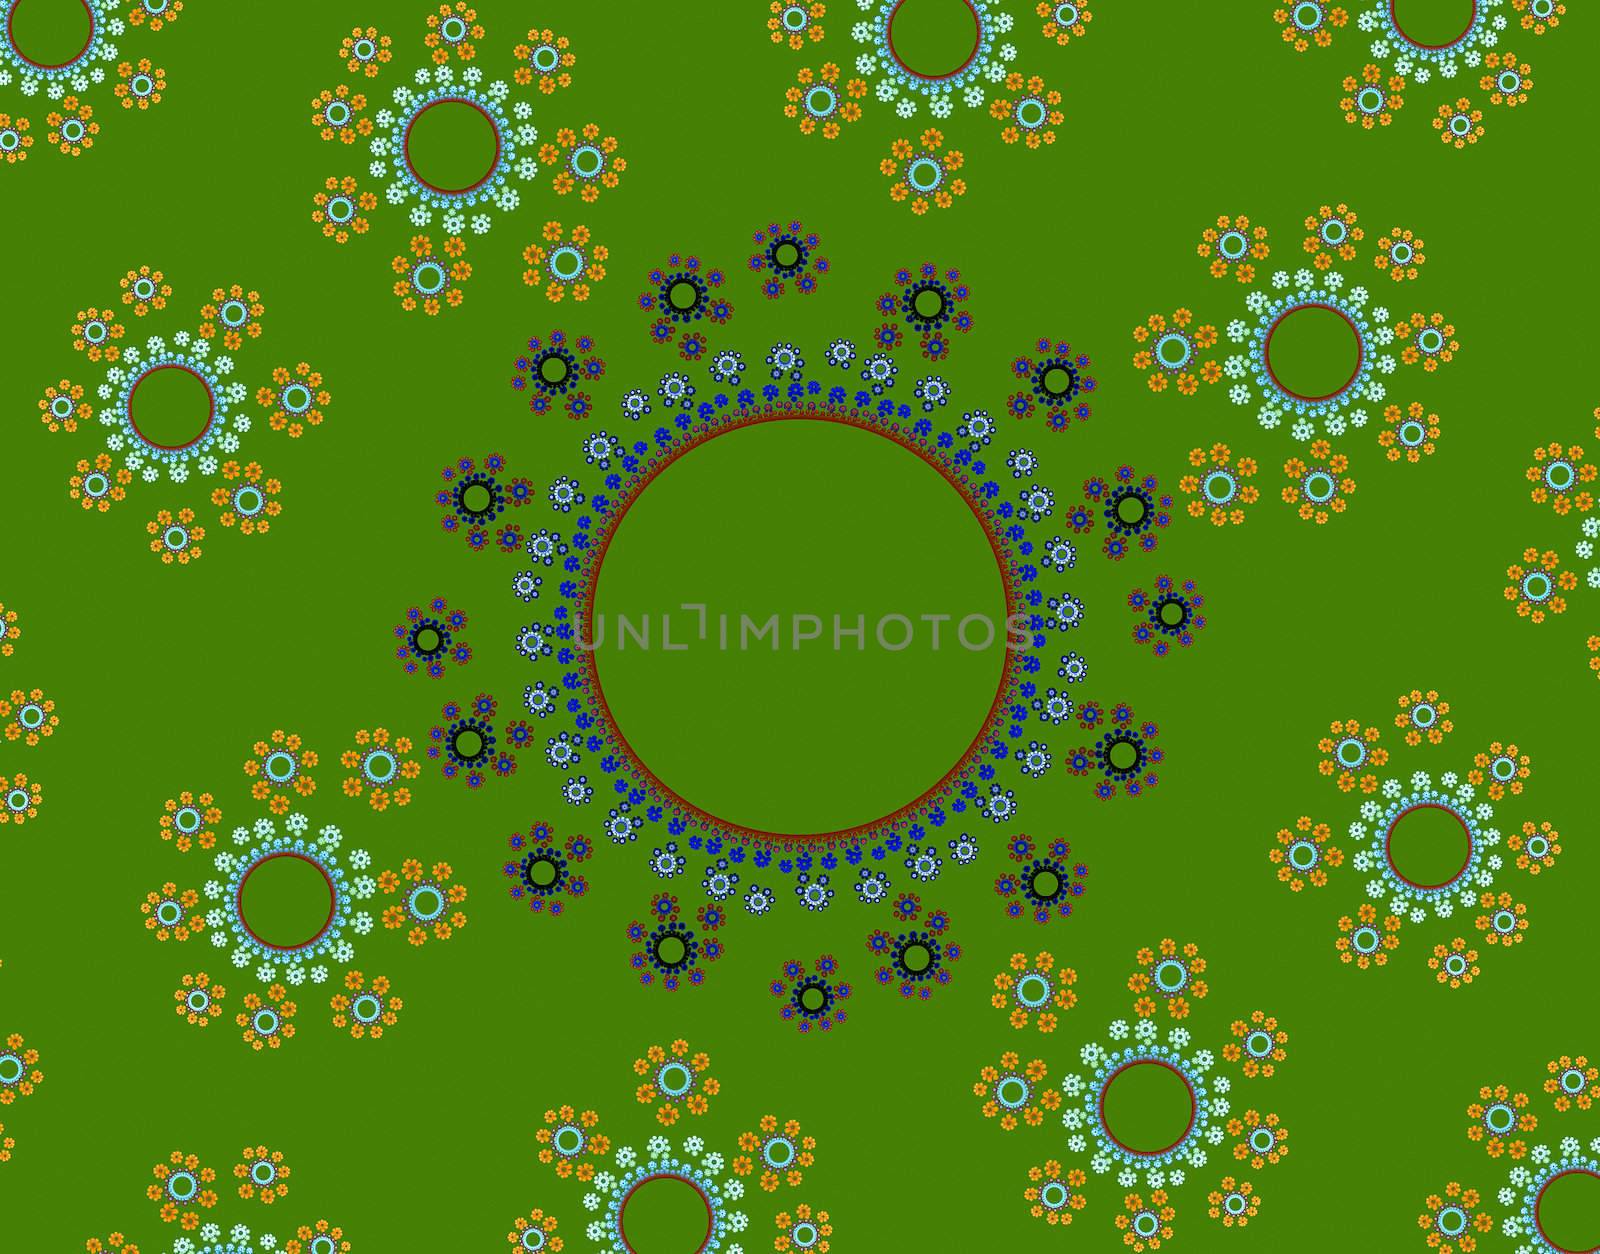 The symmetric and original image as a flower generated by the computer program. I store at myself in archive an initial file with the alpha - channel.